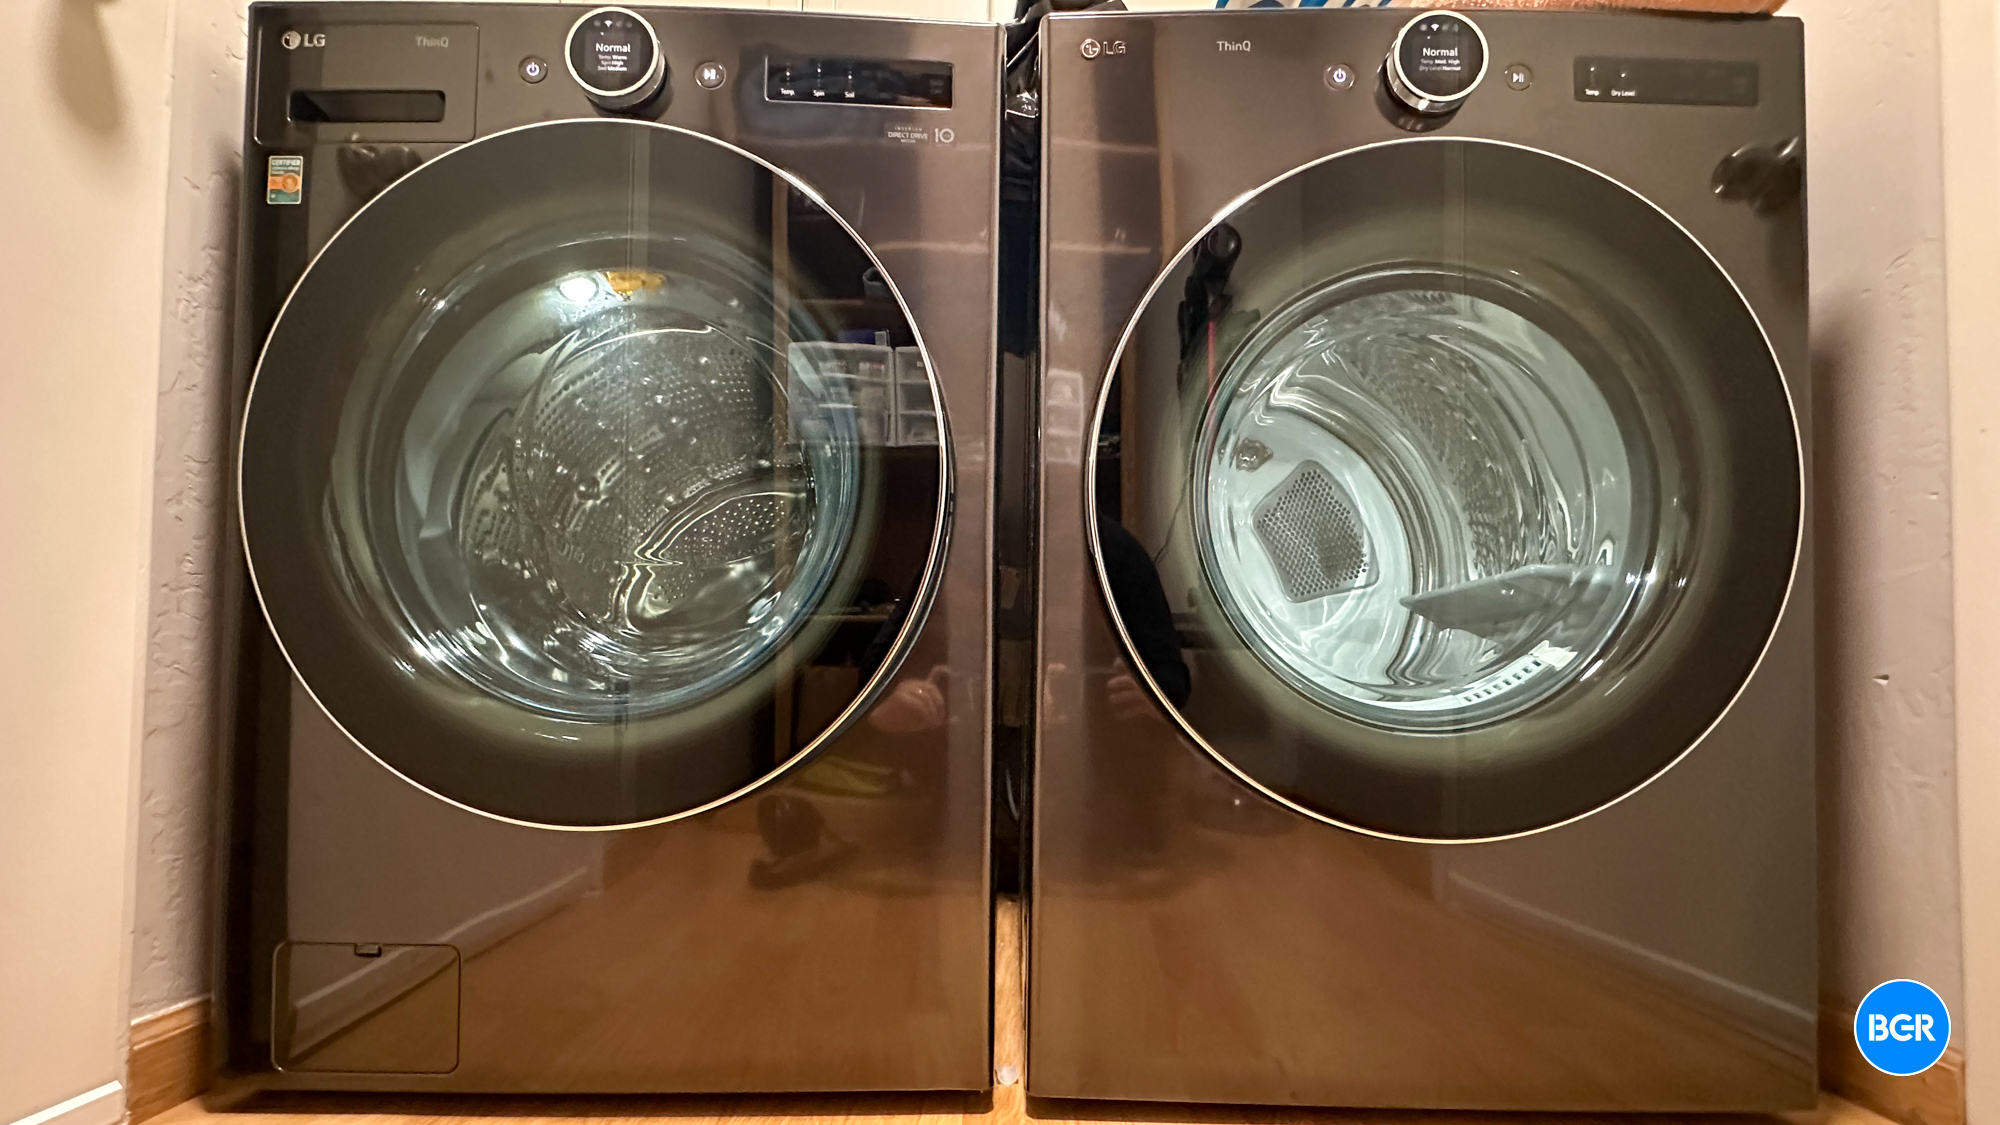 LG's AI-powered 'smart' washer tells you how to clean your clothes